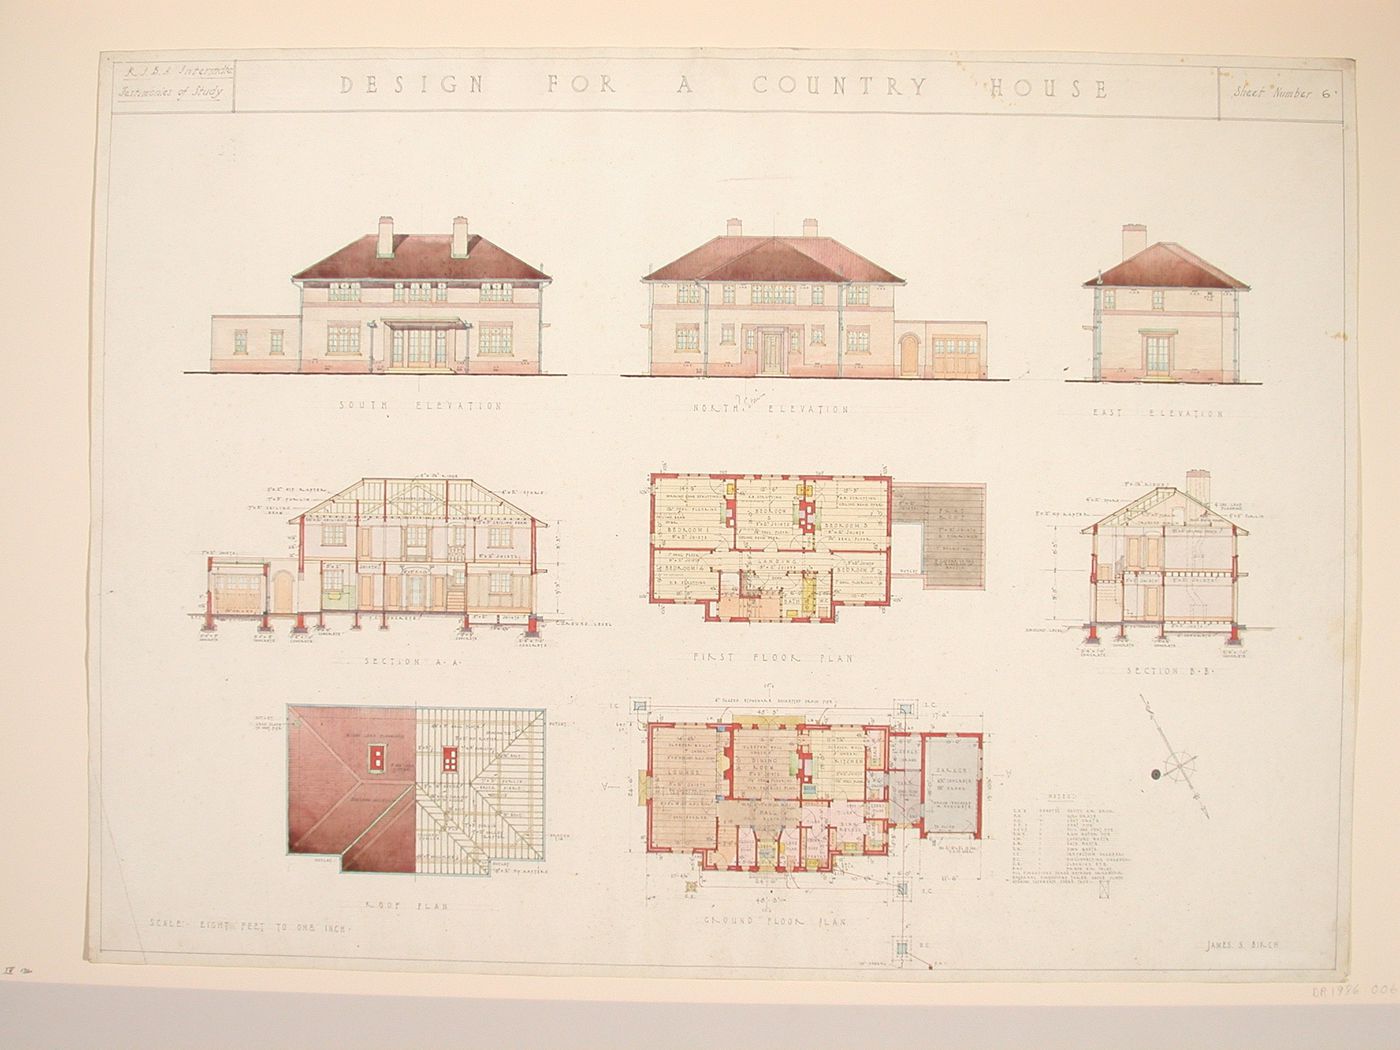 Testimony of study drawing showing plans, elevations and sections of a design for a country house